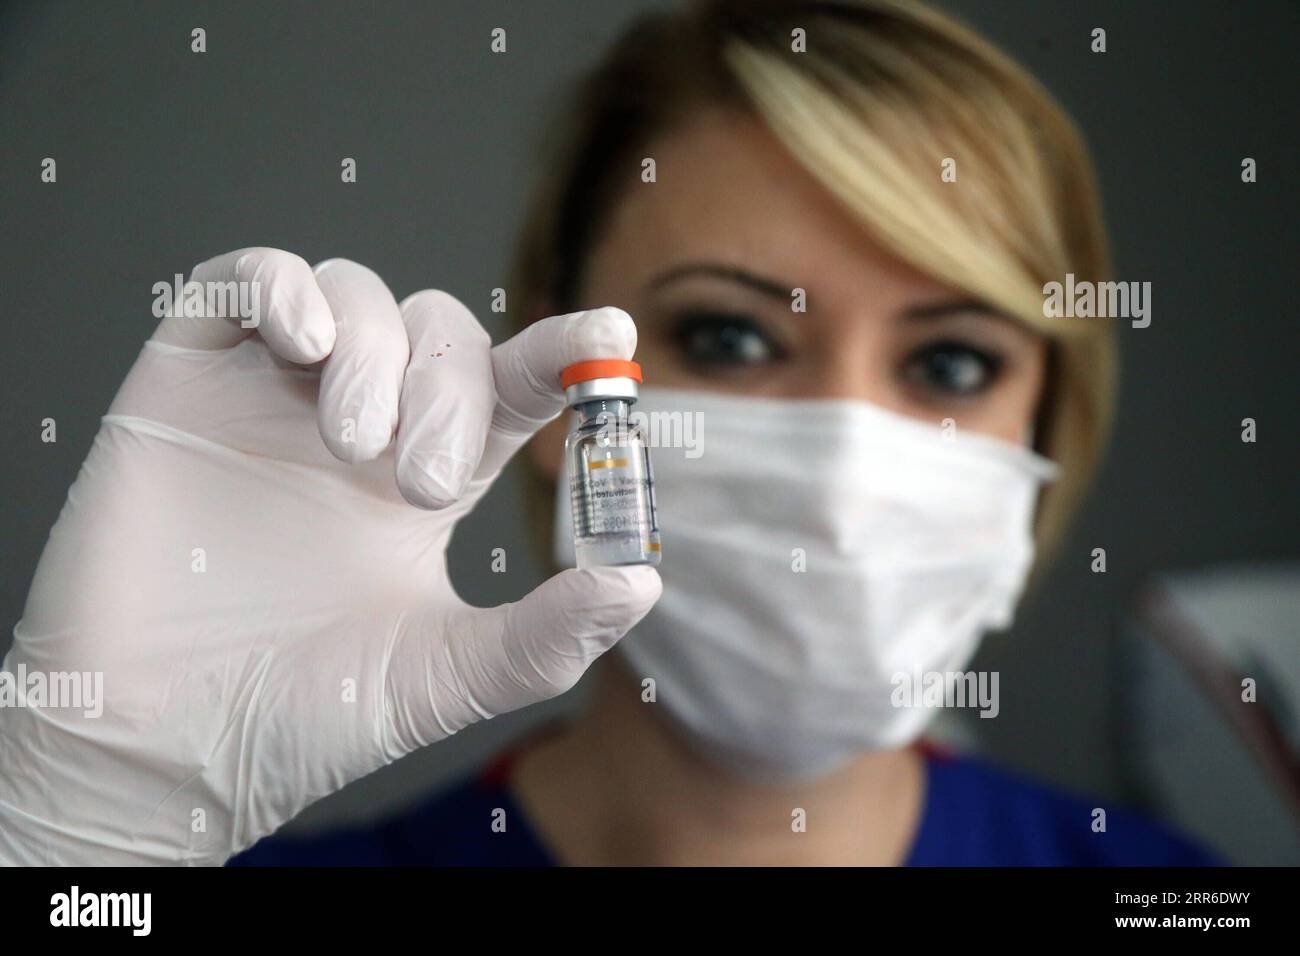 210208 -- ANKARA, Feb. 8, 2021 -- A nurse shows a vial of the COVID-19 vaccine at a health center in Ankara, Turkey, on Feb. 8, 2021. Turkey on Monday reported 8,103 new COVID-19 cases, including 632 symptomatic patients, as the total number of positive cases in the country reached 2,539,559, according to its health ministry. Photo by /Xinhua TURKEY-ANKARA-COVID-19-VACCINATION MustafaxKaya PUBLICATIONxNOTxINxCHN Stock Photo